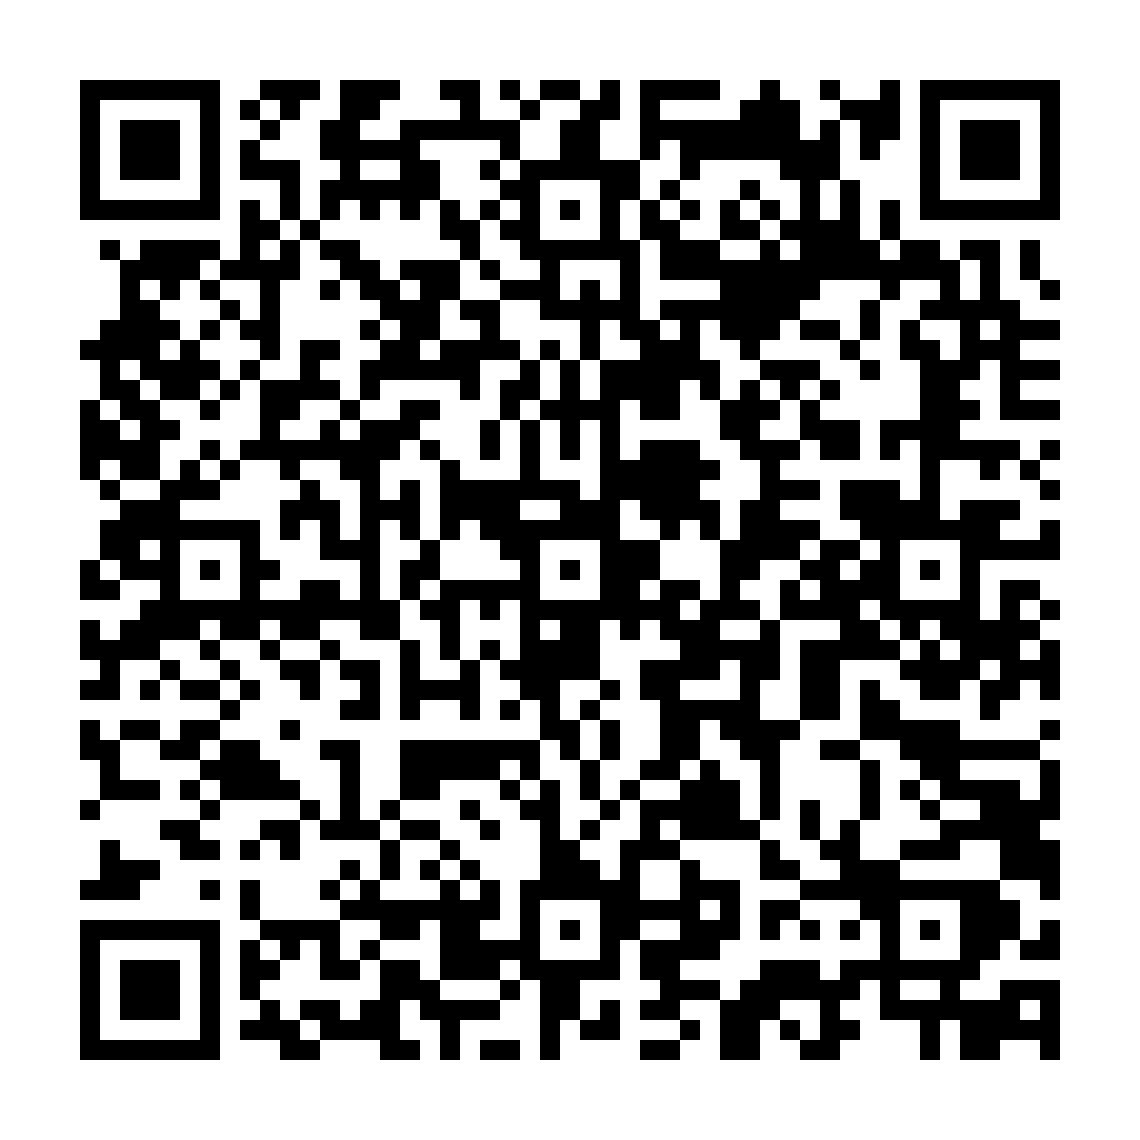 VERIFIED BY MSME PORTAL (scanning the QR code)